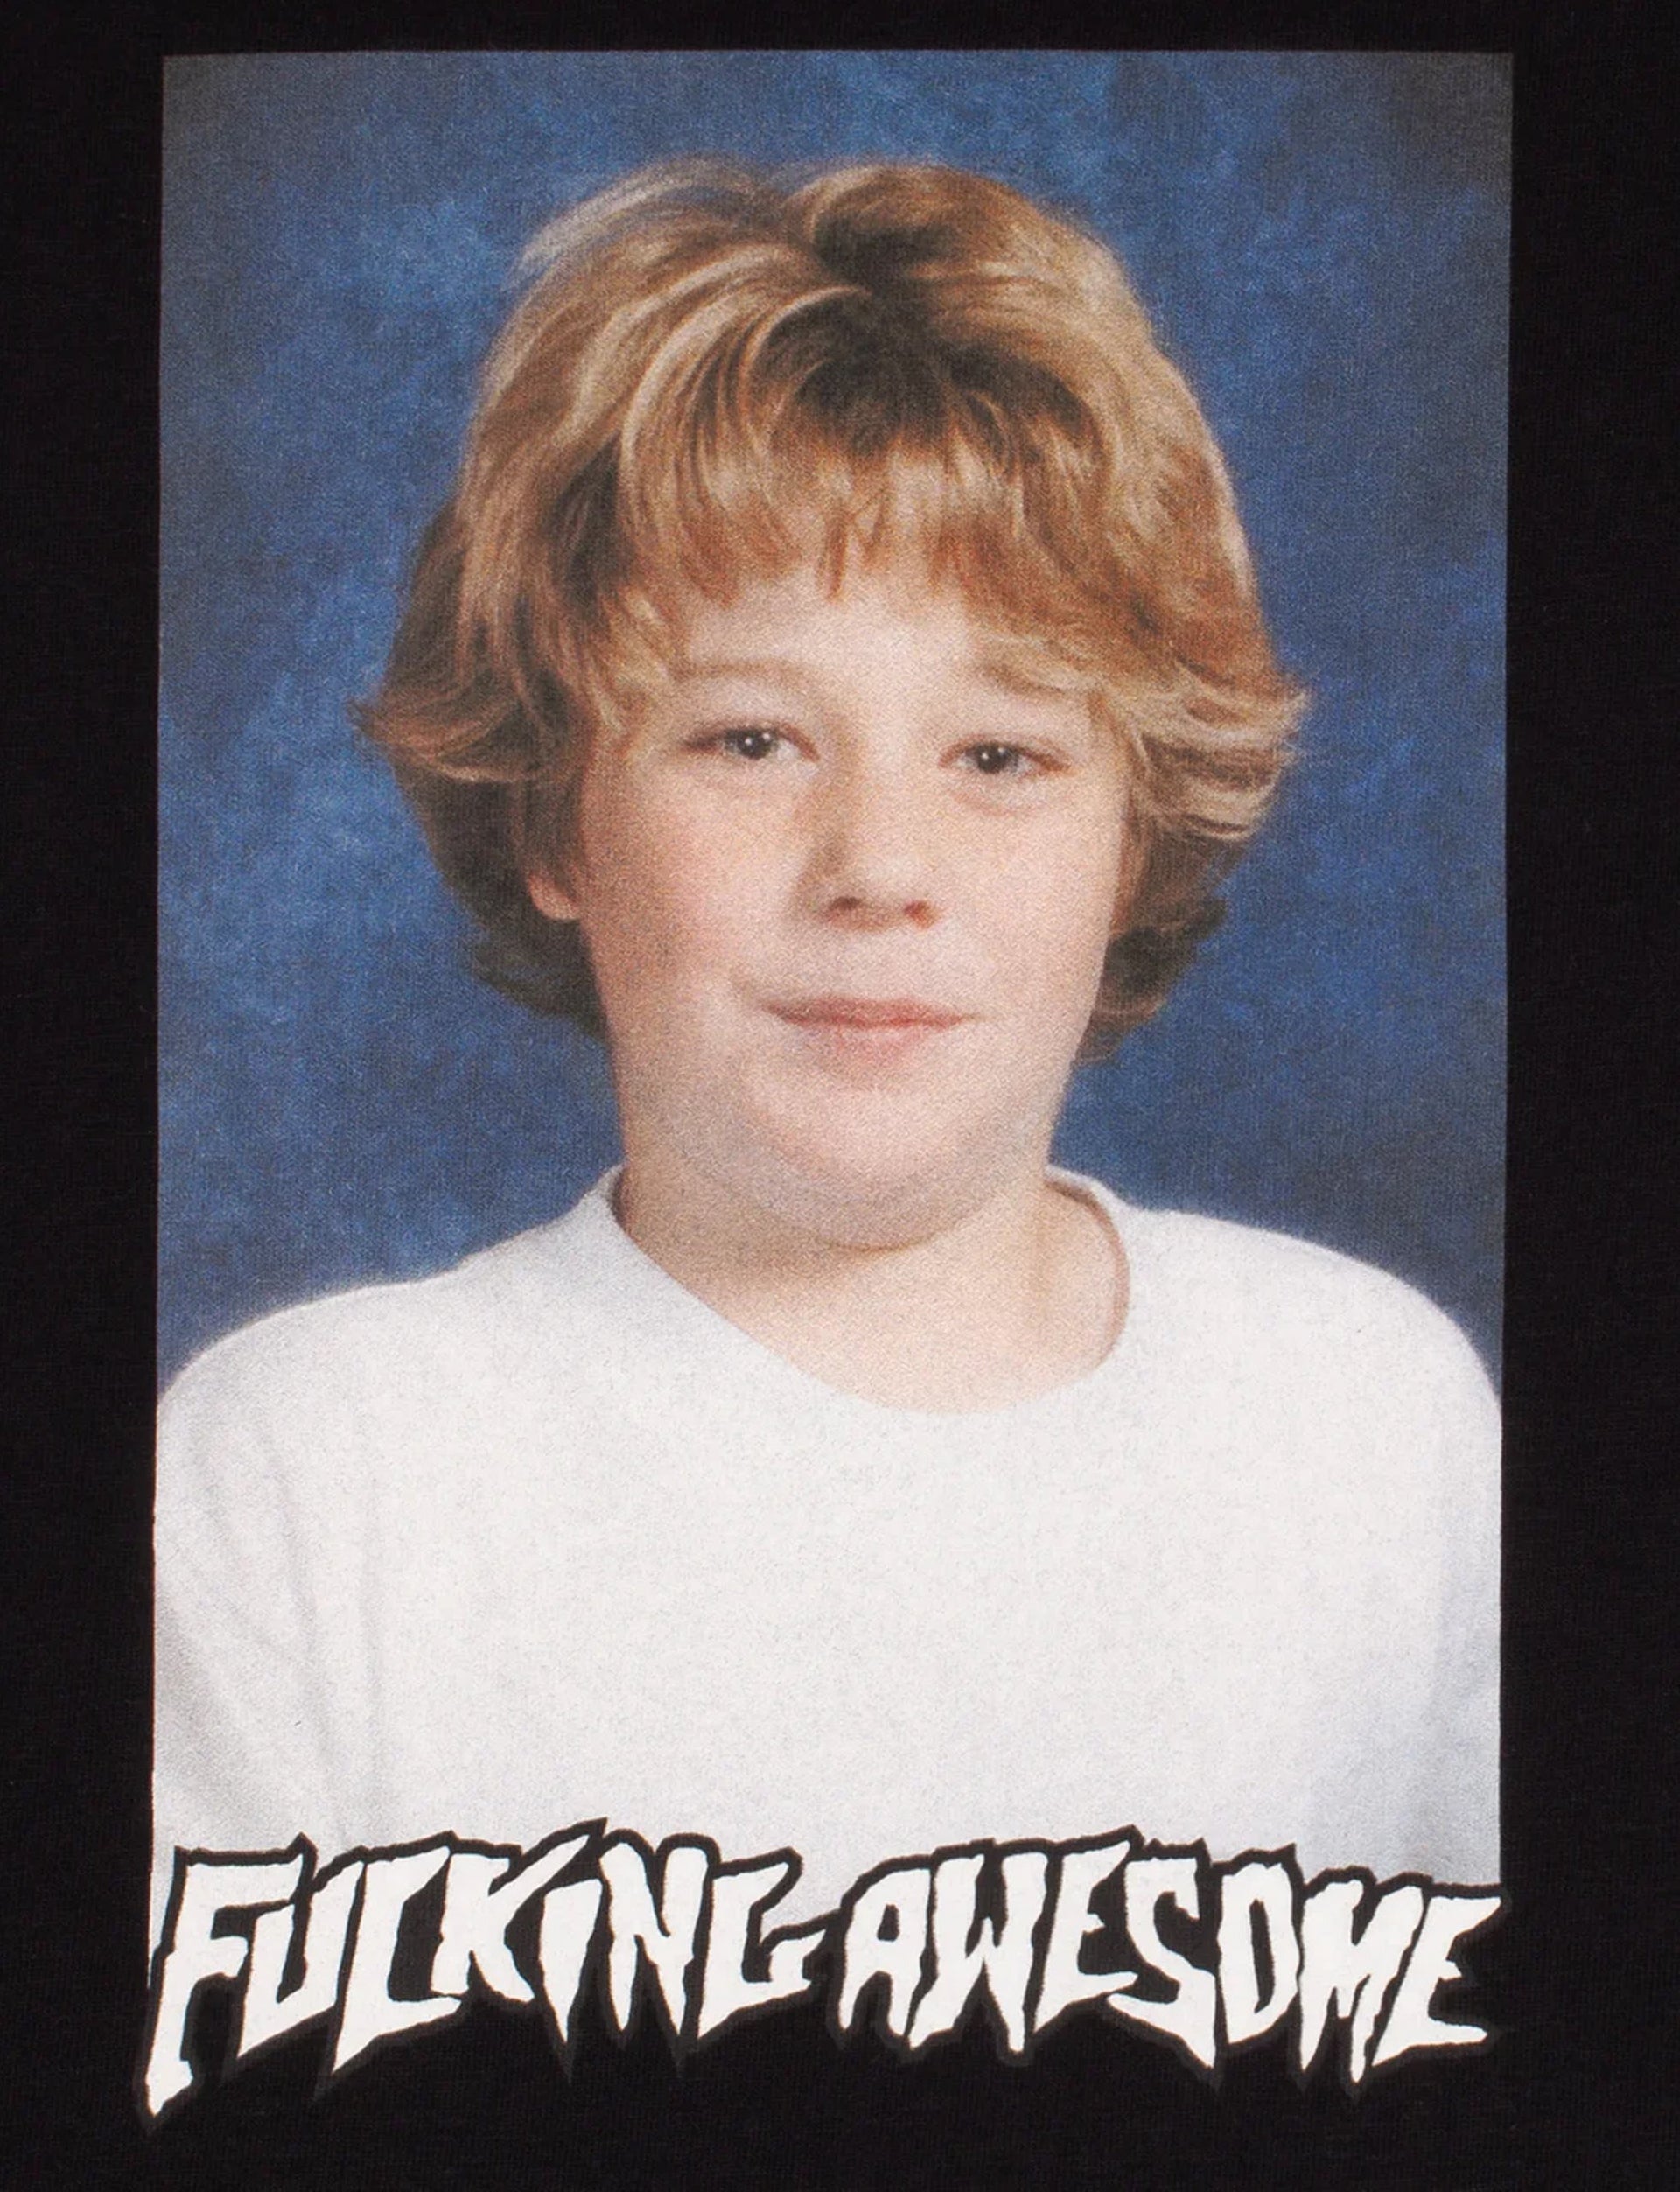 FUCKING AWESOME Jake Anderson Class Photo Tee BLACK